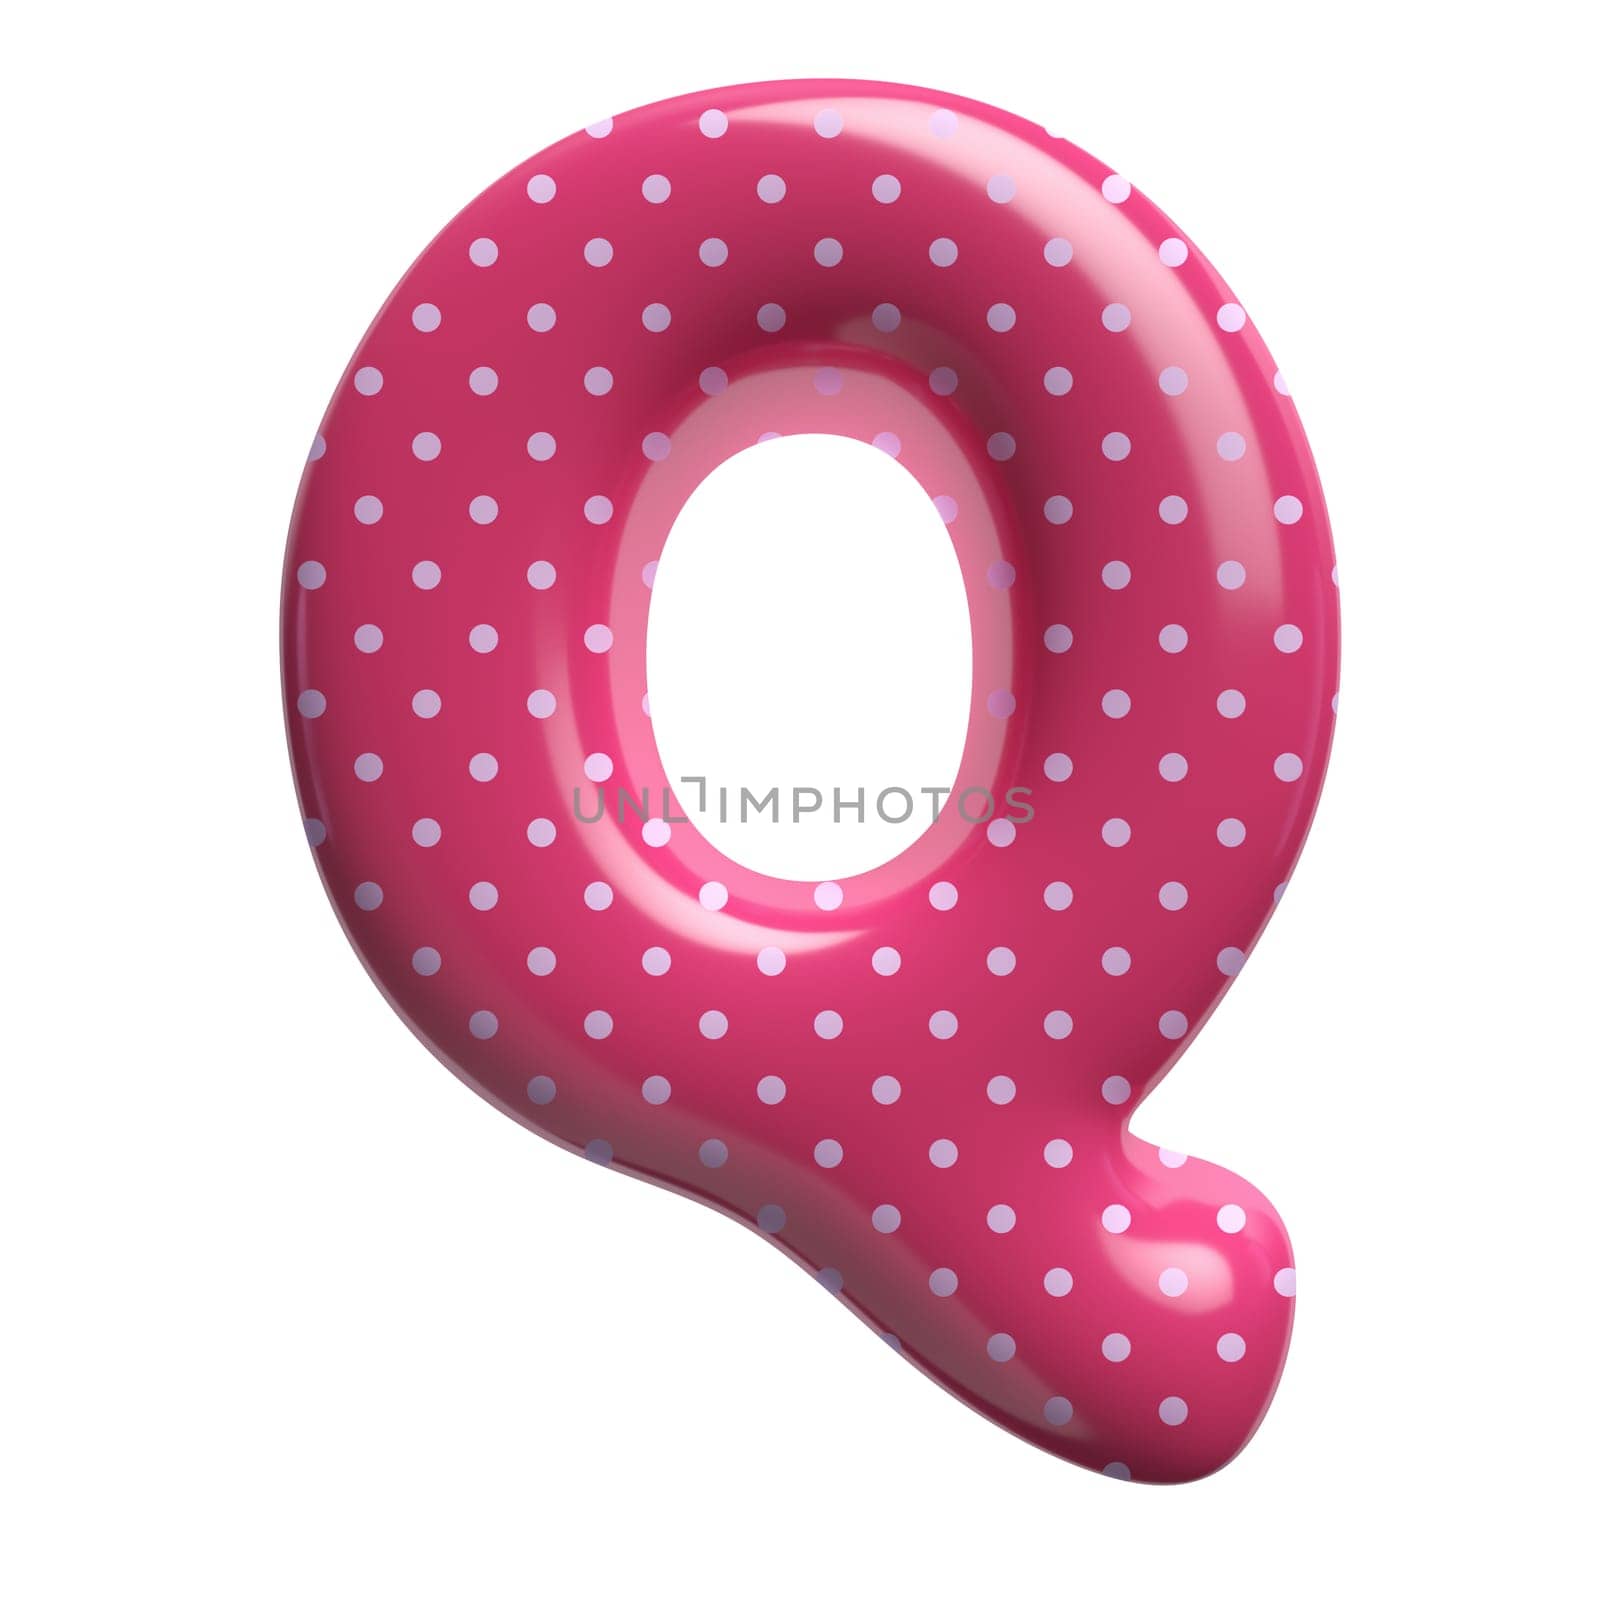 Polka dot letter Q - large 3d pink retro font isolated on white background. This alphabet is perfect for creative illustrations related but not limited to Fashion, retro design, decoration...